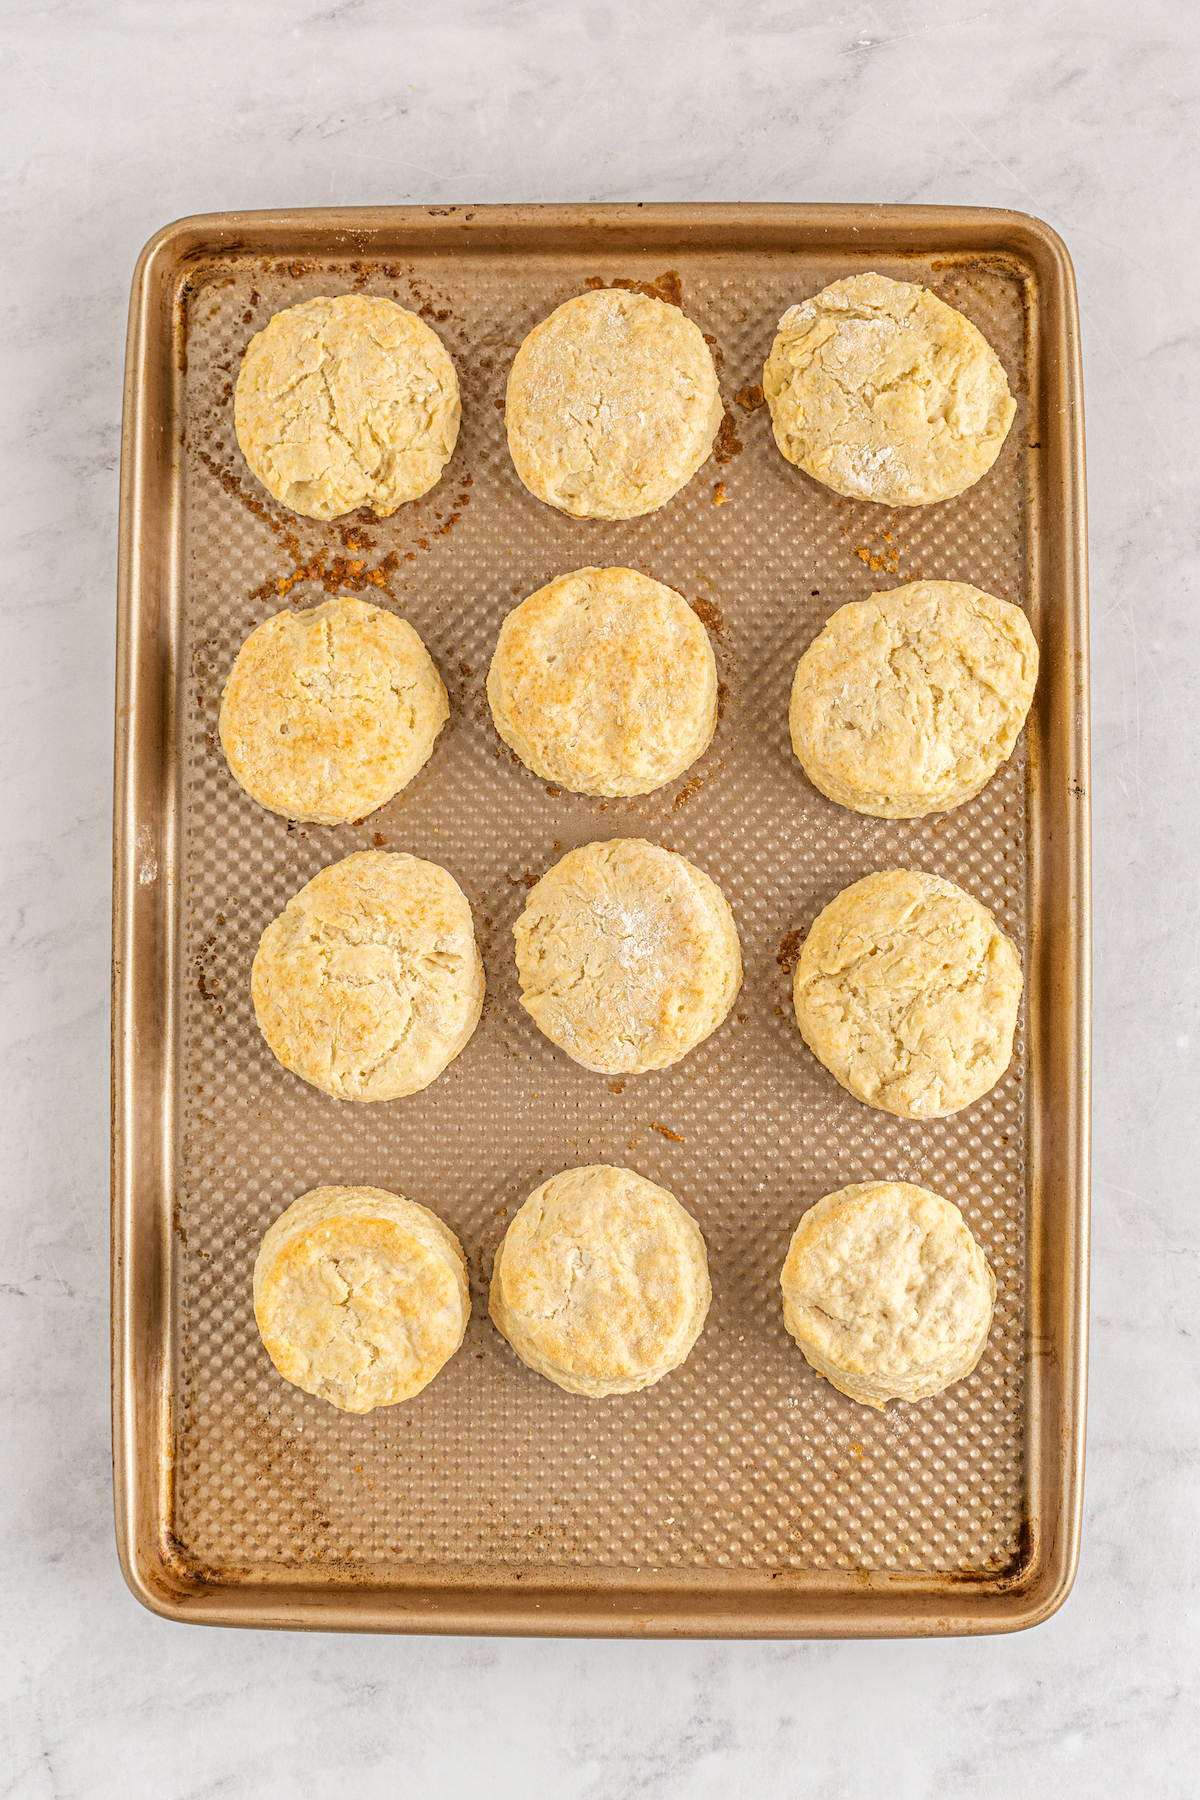 Baked biscuits on a baking sheet.